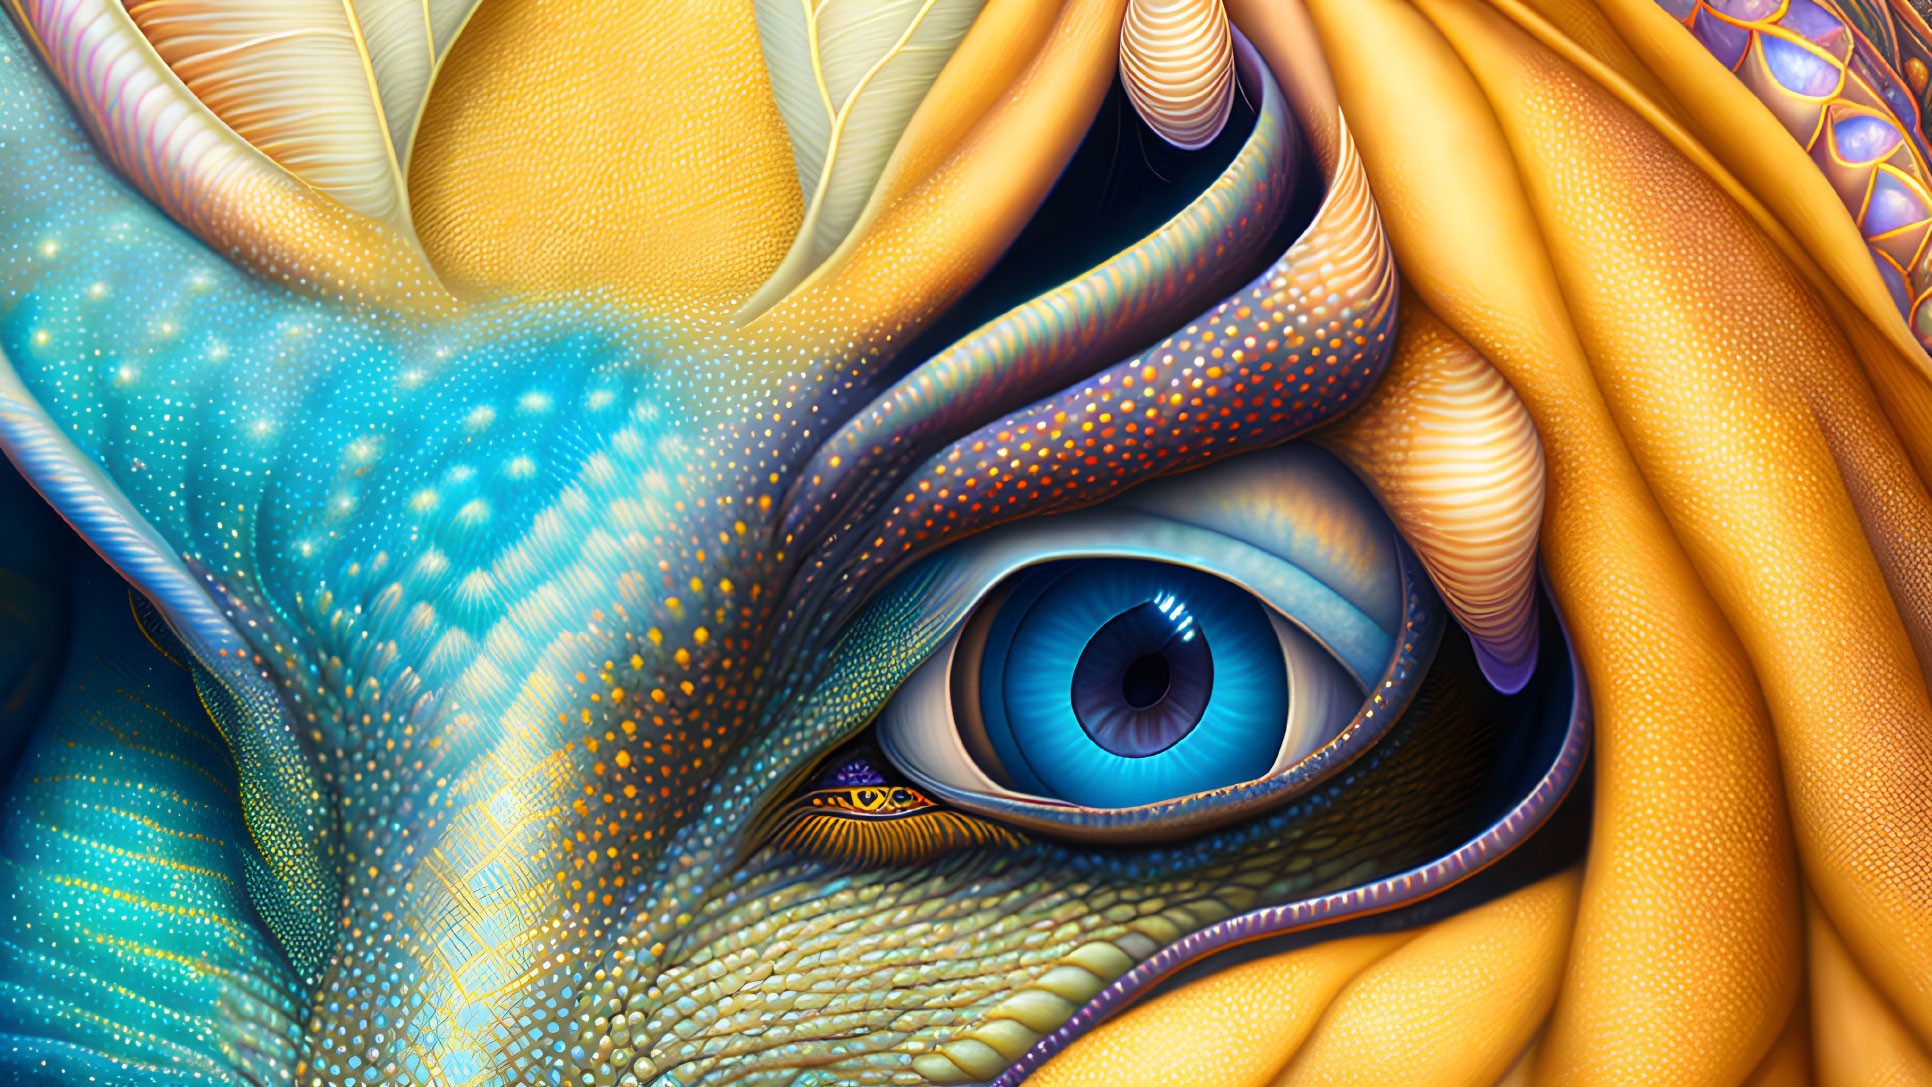 Colorful surreal eye surrounded by abstract patterns in blue, yellow, and orange